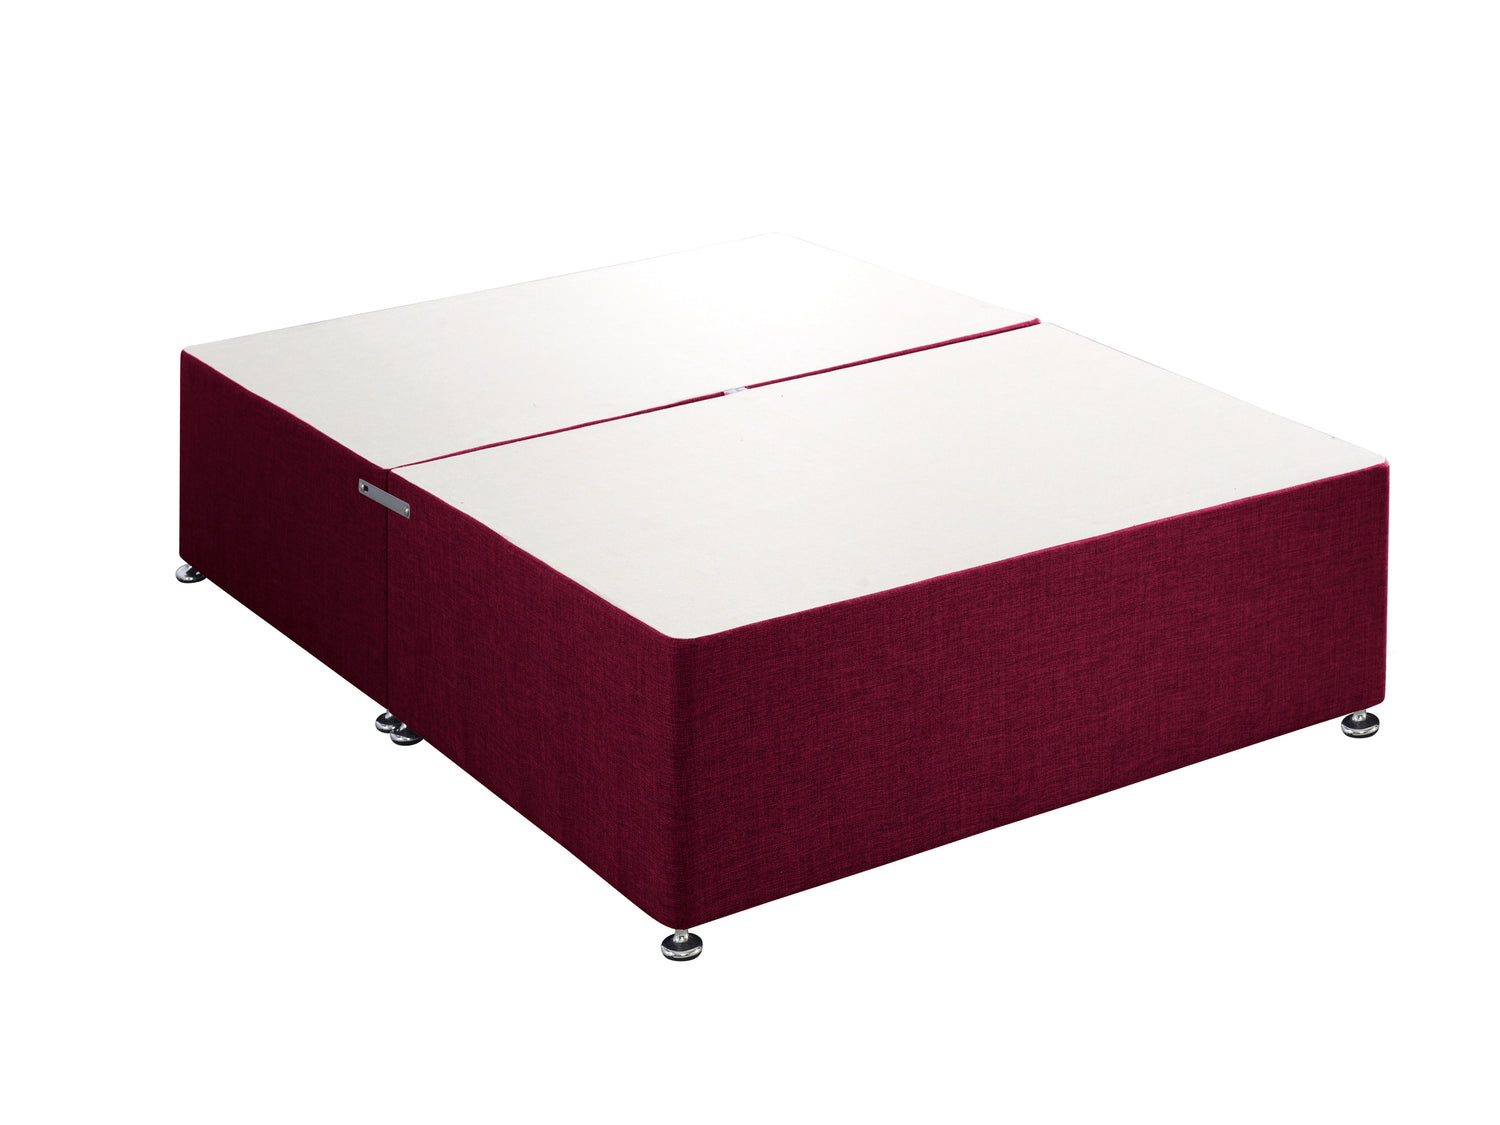 Fabric Base Plum-Better Bed Company 